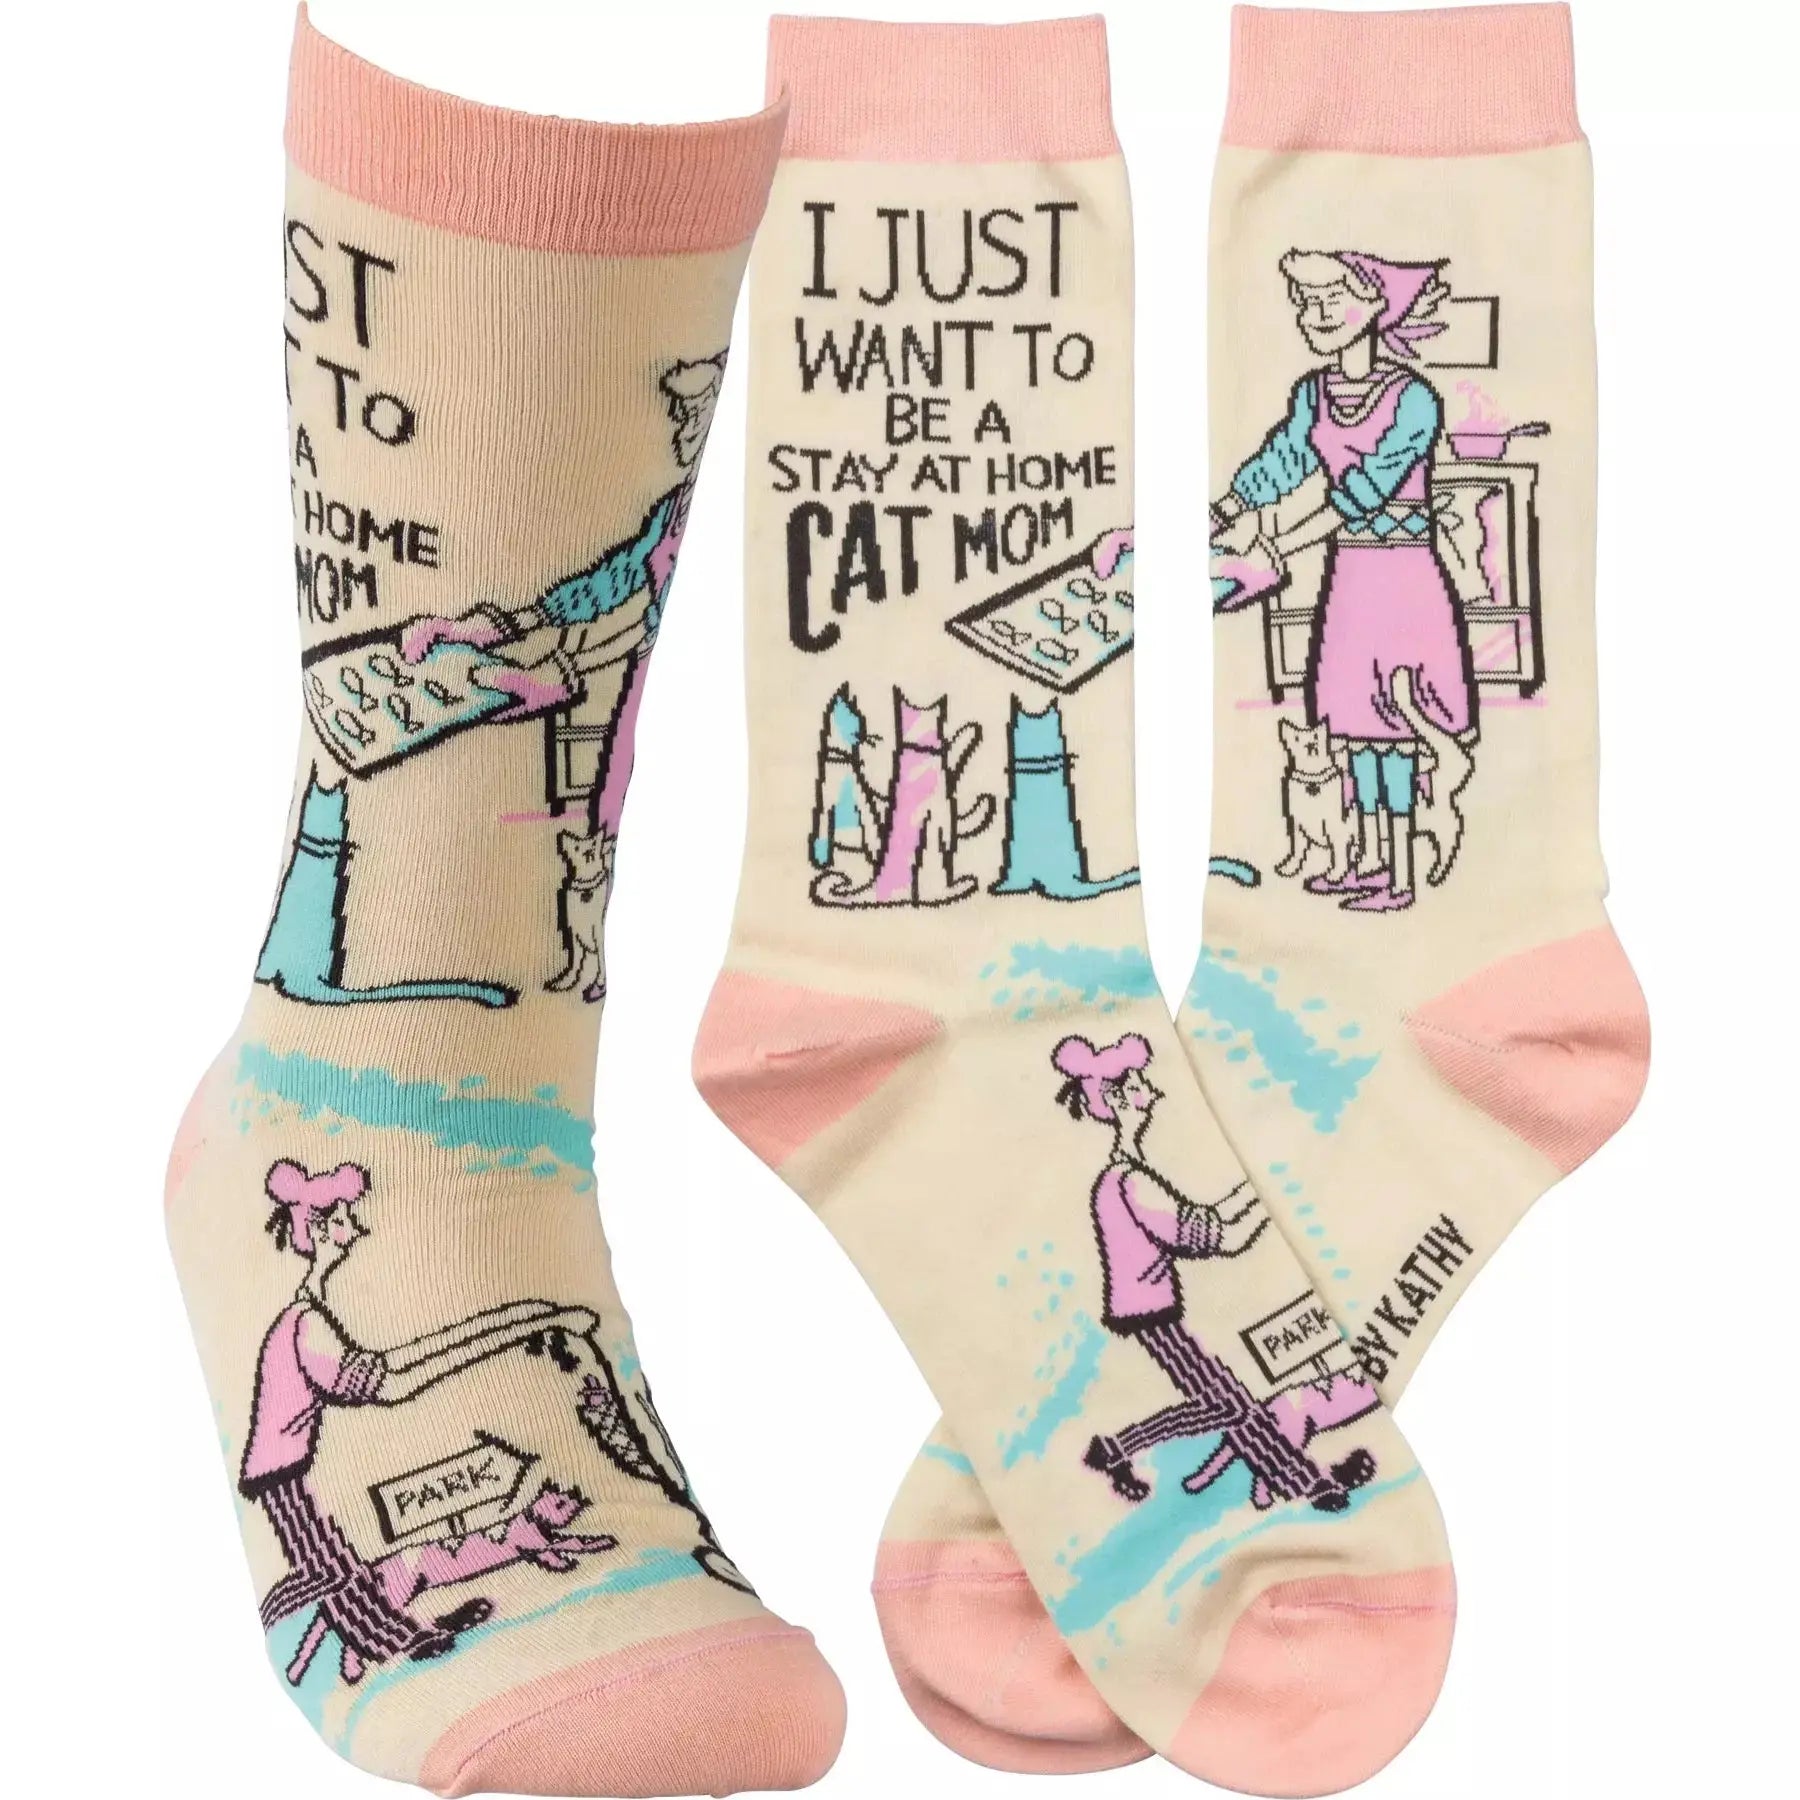 Primitives By Kathy -"Stay At Home Cat Mom" Socks PRIMITIVES BY KATHY